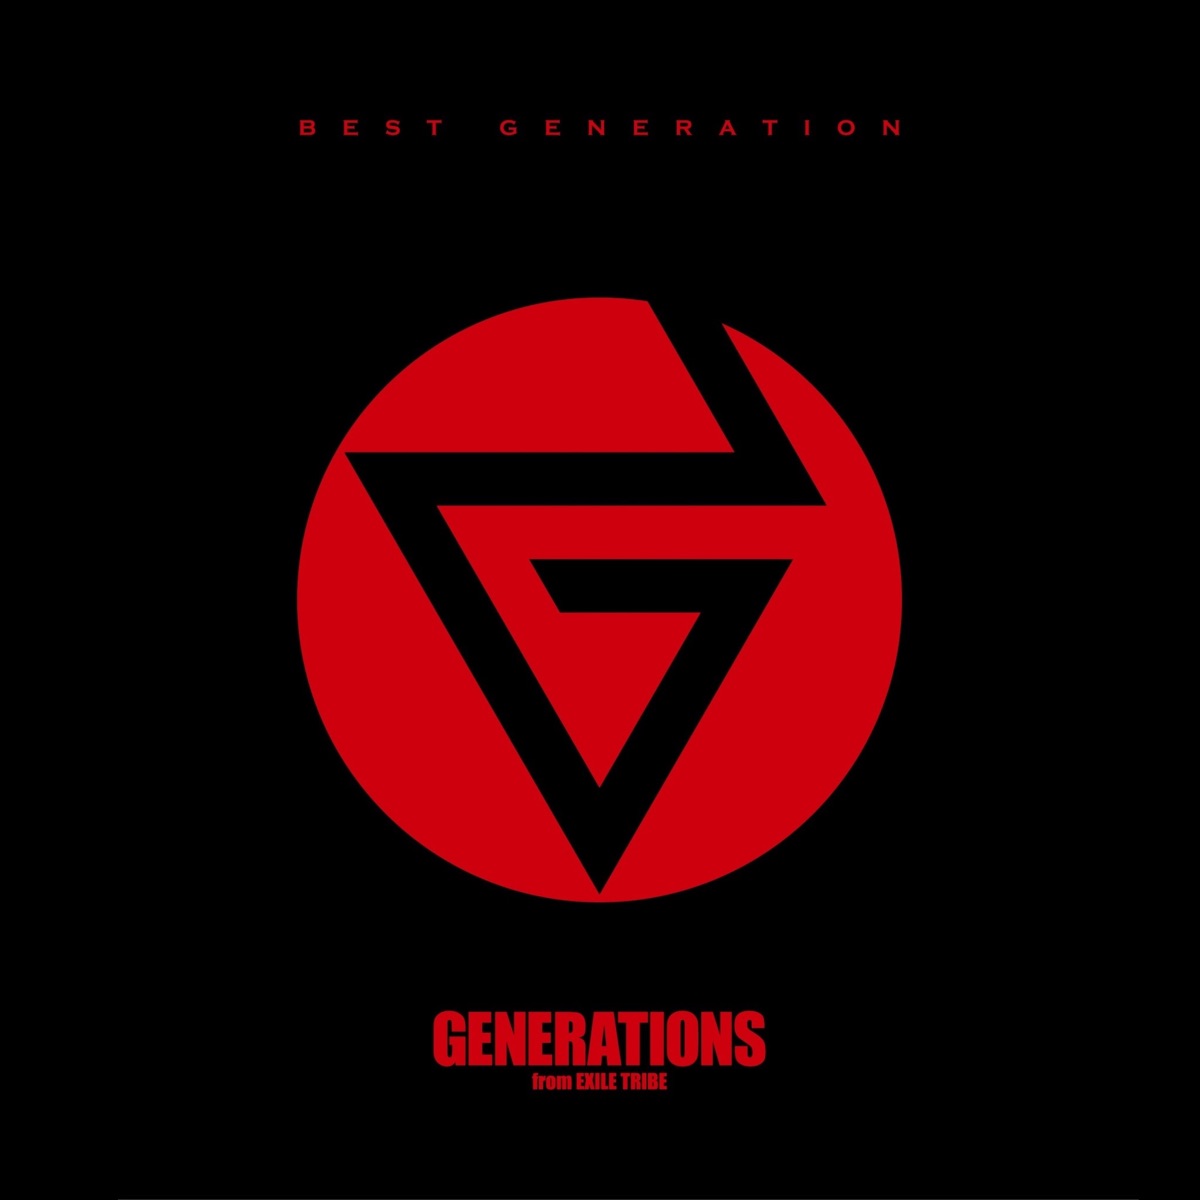 Best Generation - Album by GENERATIONS from EXILE TRIBE - Apple Music